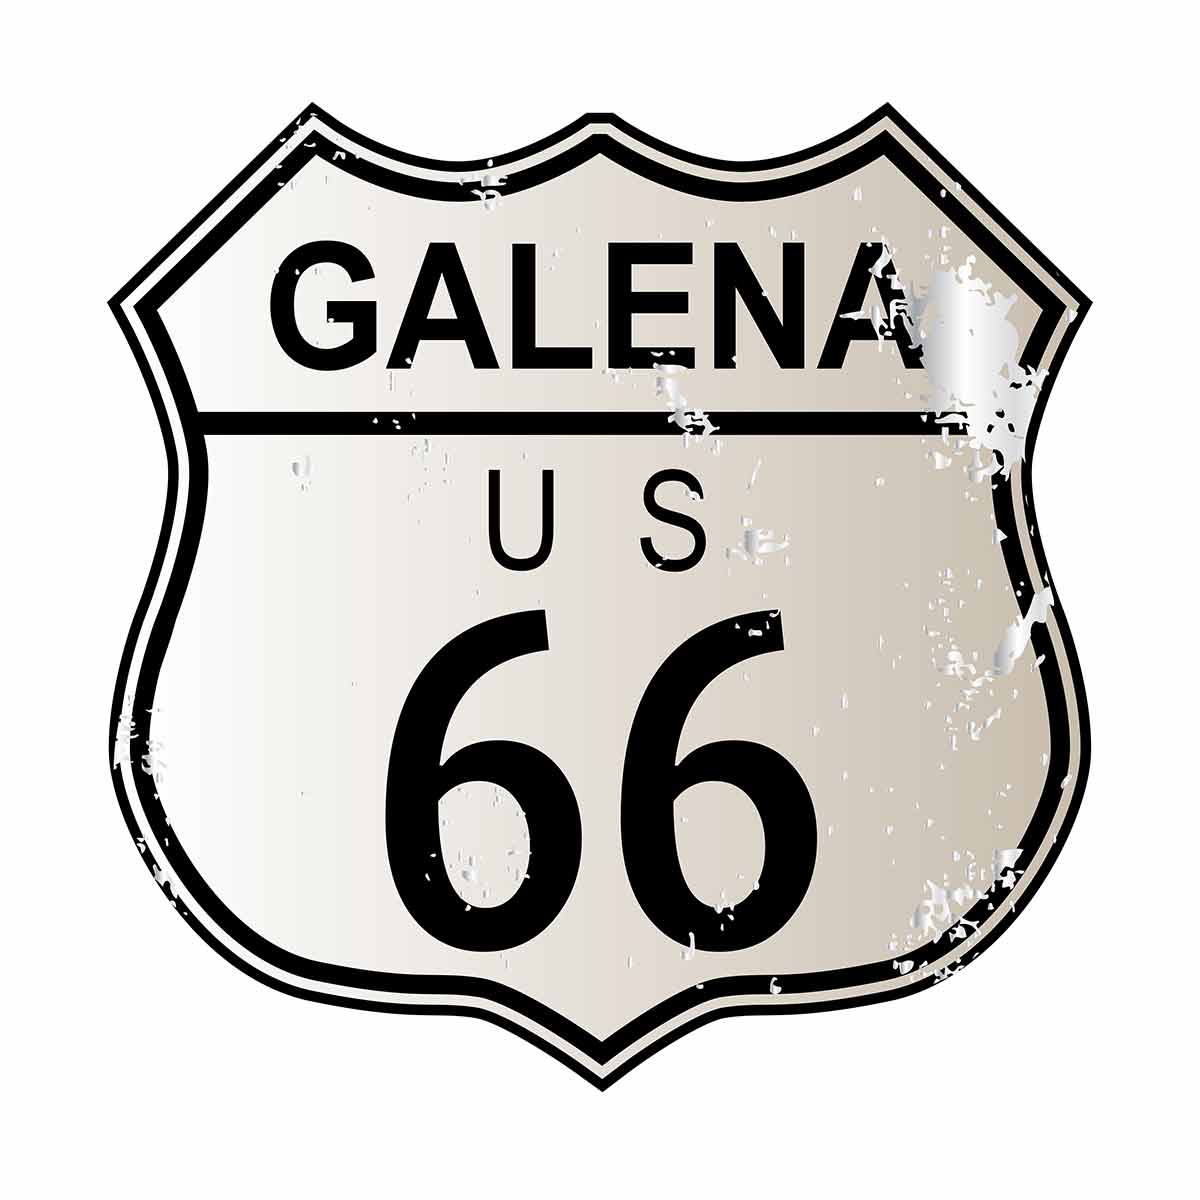 Galena Route 66 traffic sign over a white background and the legend ROUTE US 66.